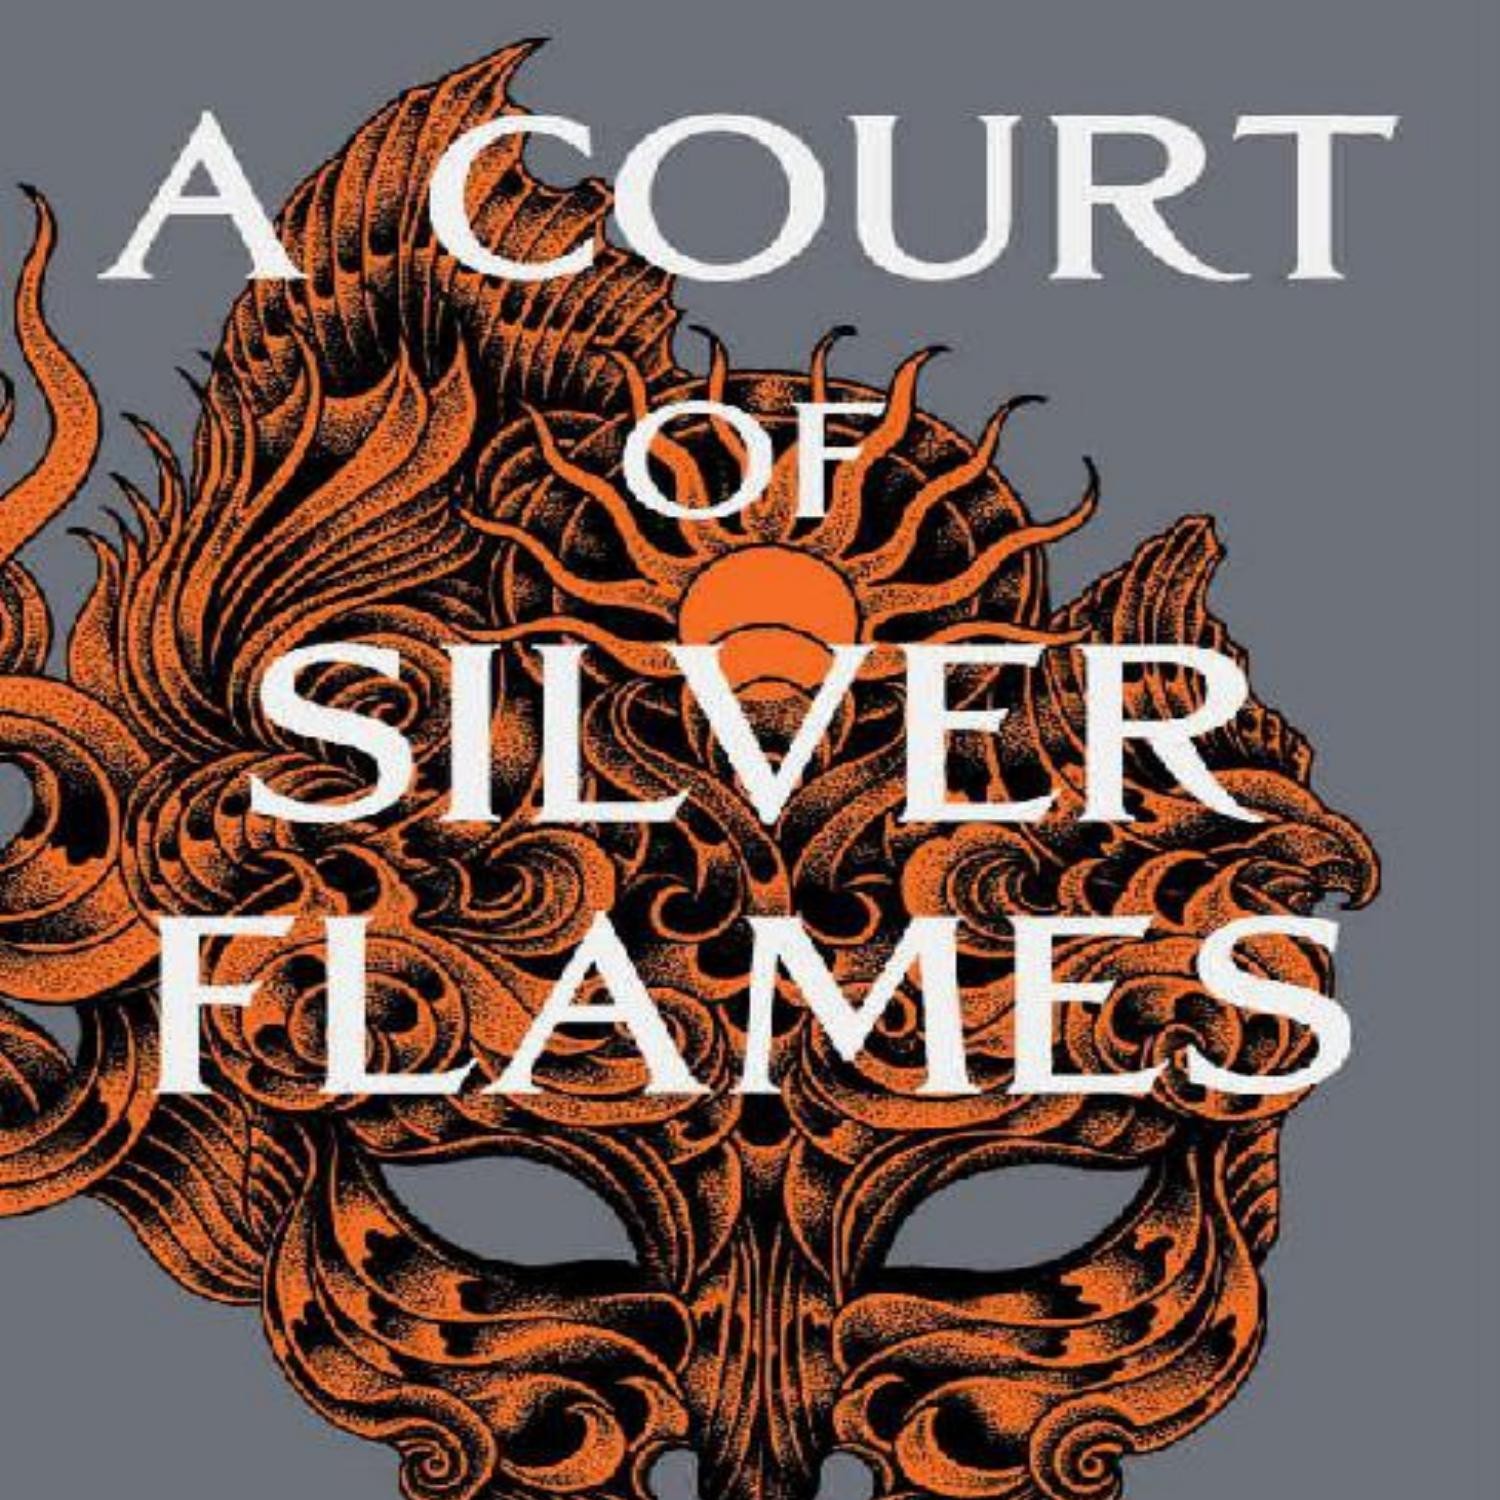 A Court of Silver Flames by Sarah J Maas pdf DocDroid